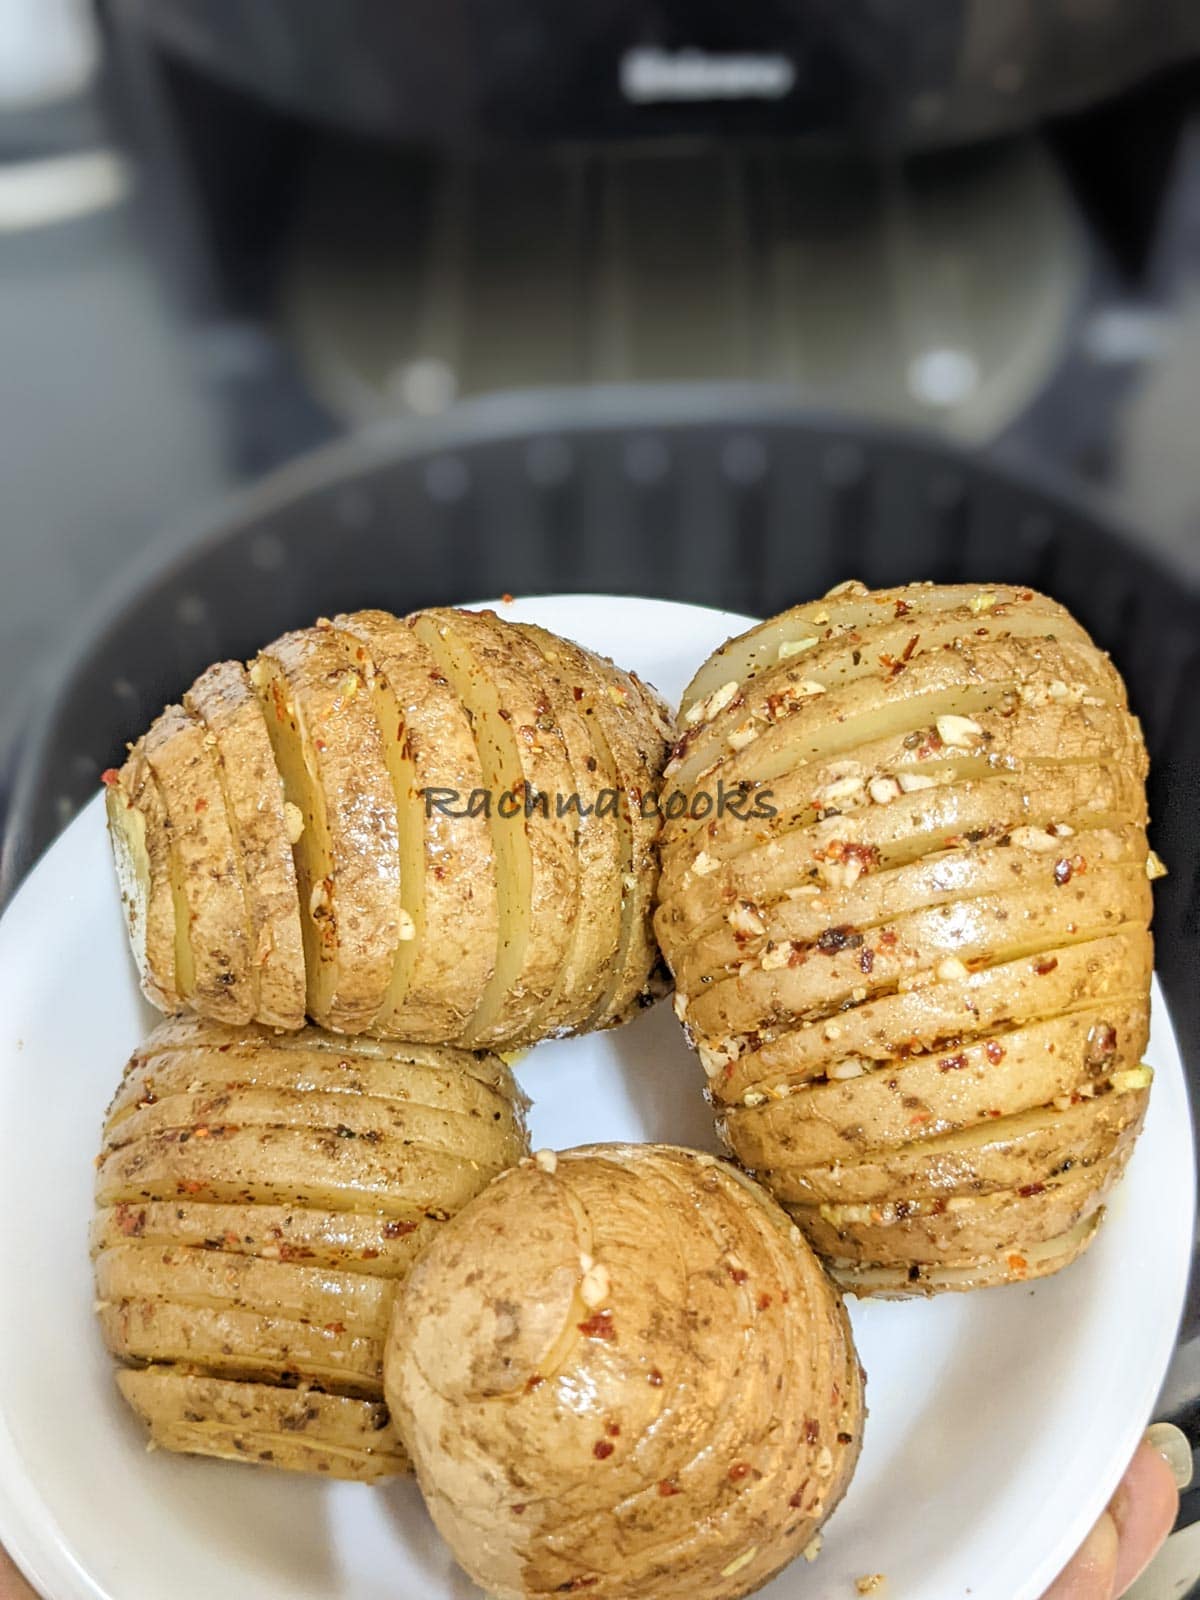 Four hasselback potatoes brushed with seasoning being put into air fryer basket for air frying.